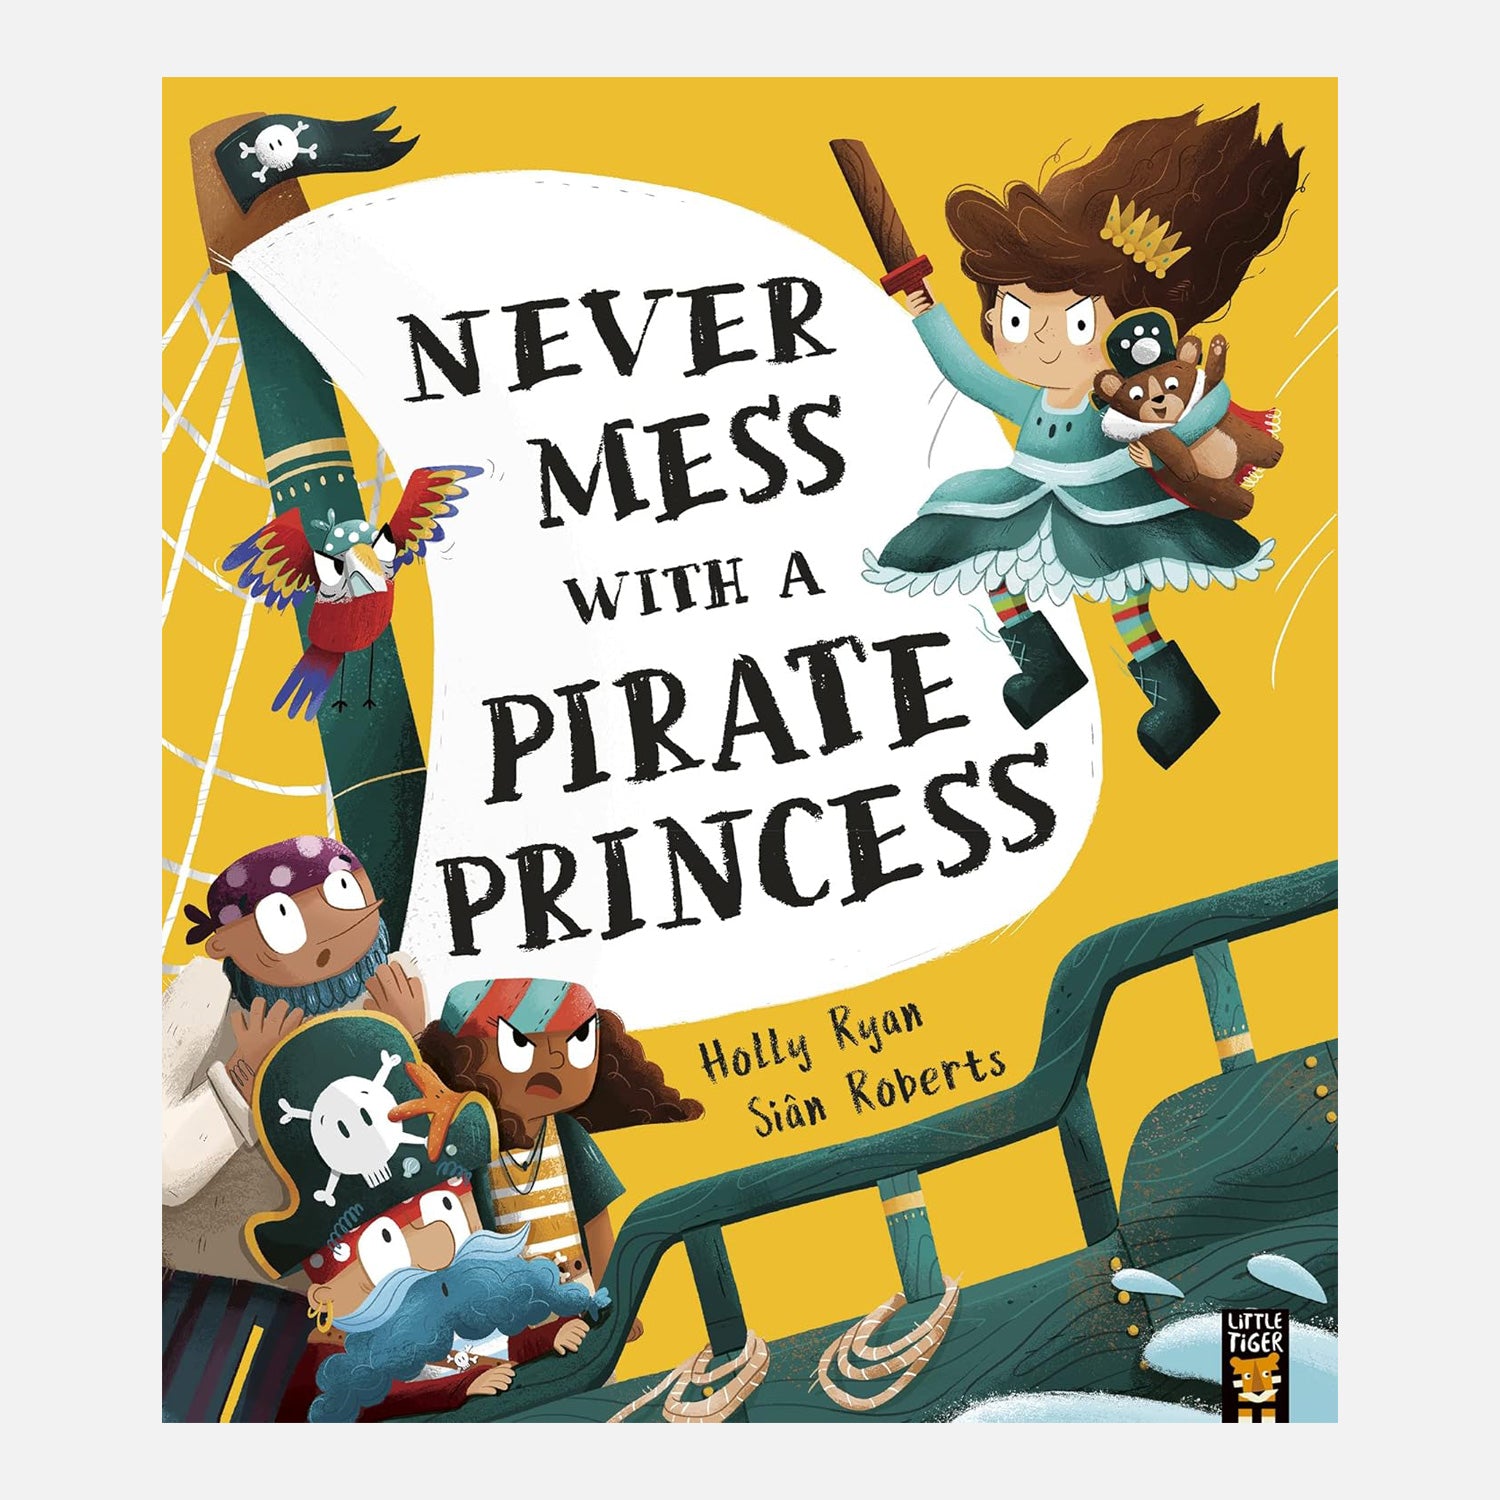 Never Mess with a pirate princess cover illustration of child pirates on a boat with a sail and a parrot